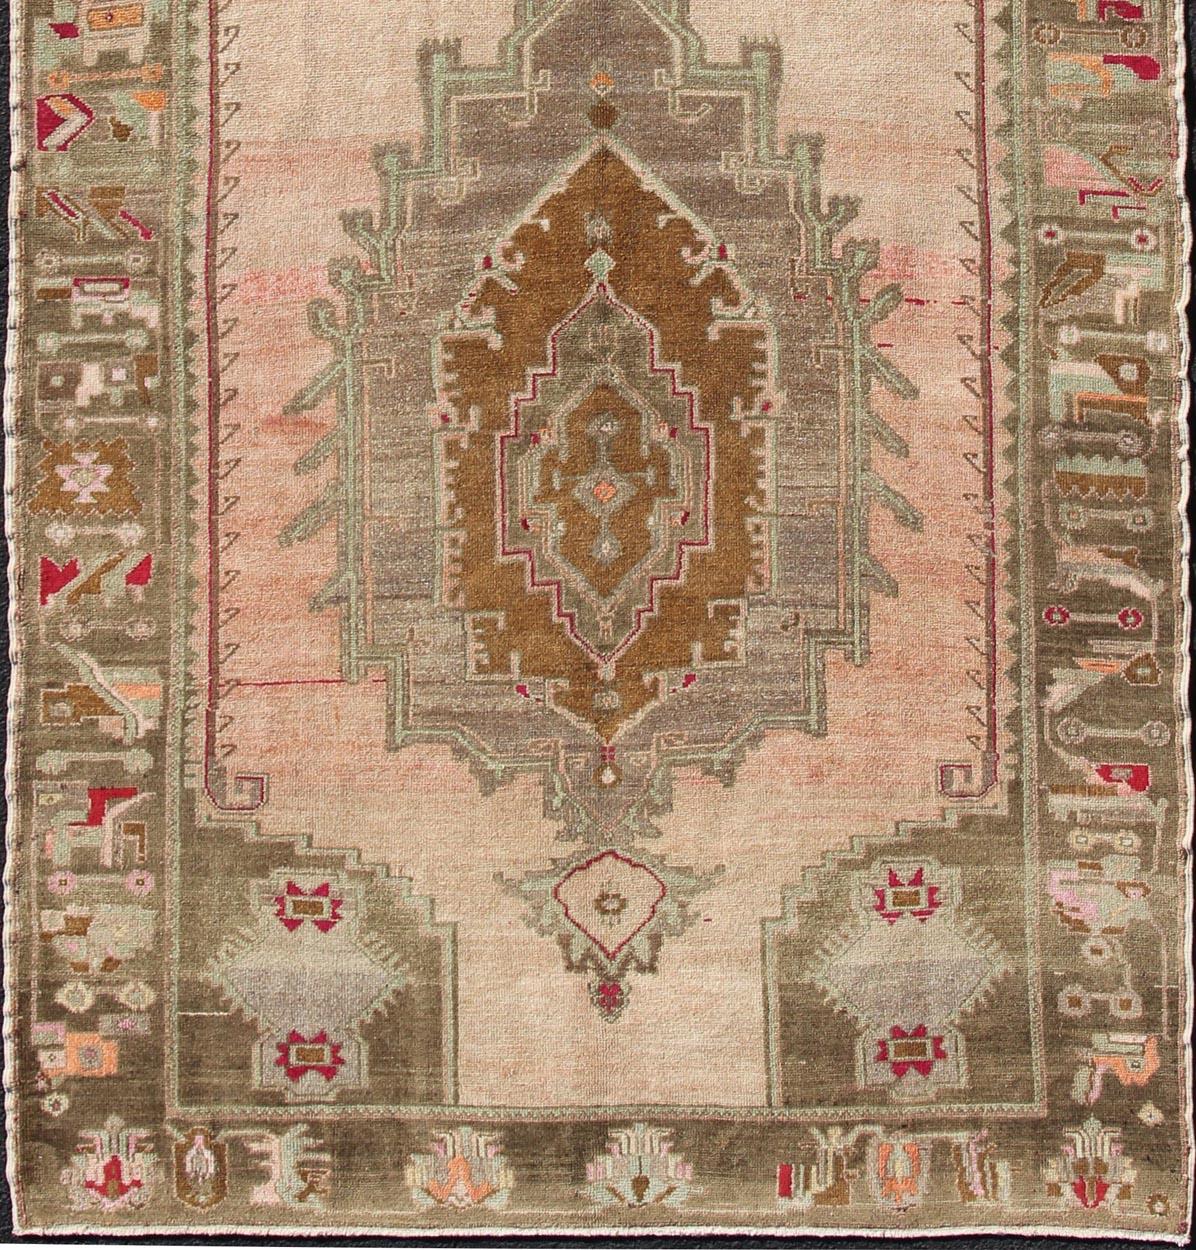 Vintage wide Gallery runner from Turkey with Medallion design in various tones of blush, salmon, light pink, various shades of greens and browns rug en-165931, country of origin / type: Turkey / Kars, circa 1940

This beautiful vintage Oushak runner